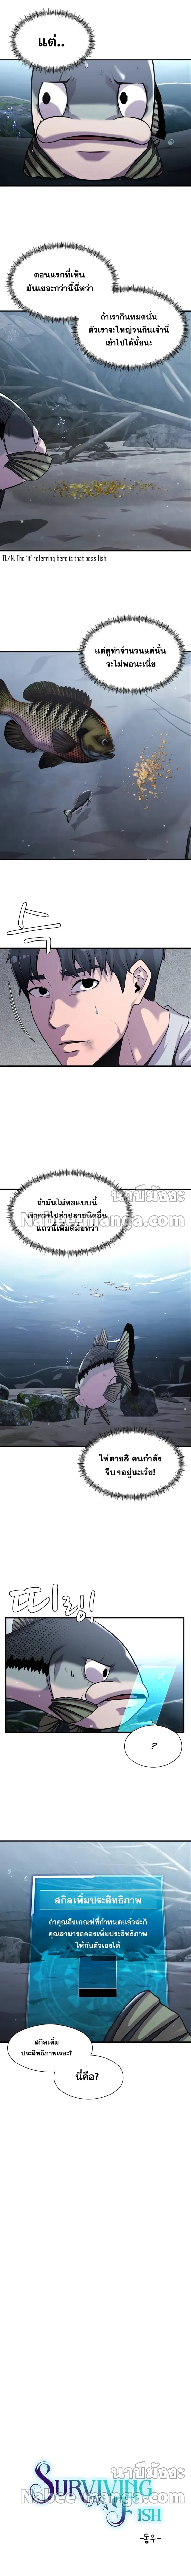 Surviving As a Fish 19 (4)